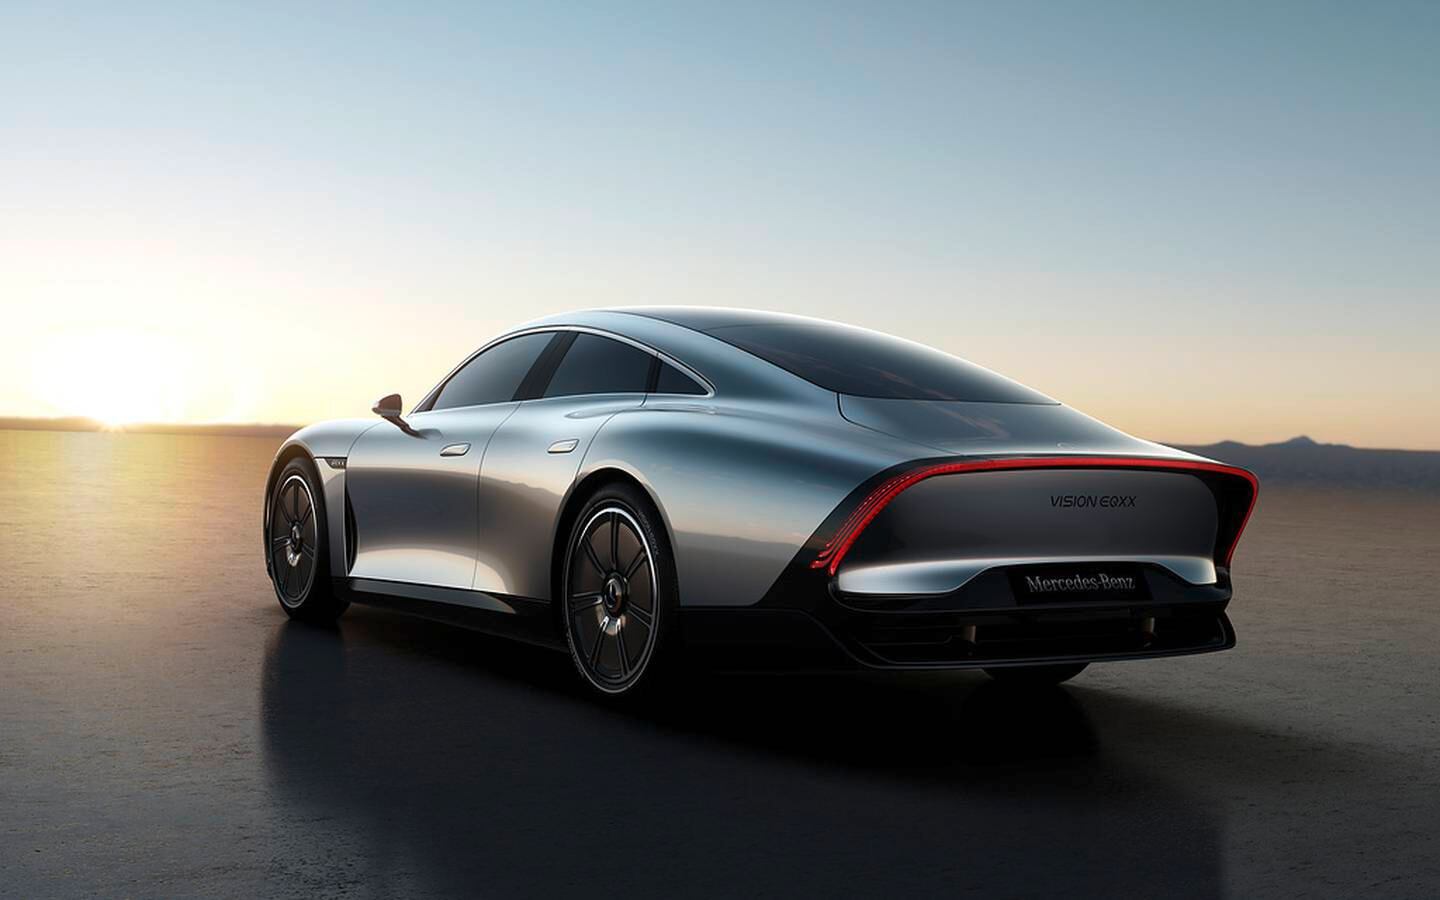 Mercedes-Benz Vision EQXX can travel up to 1,000km using just a single charge. Photo: Mercedes-Benz.